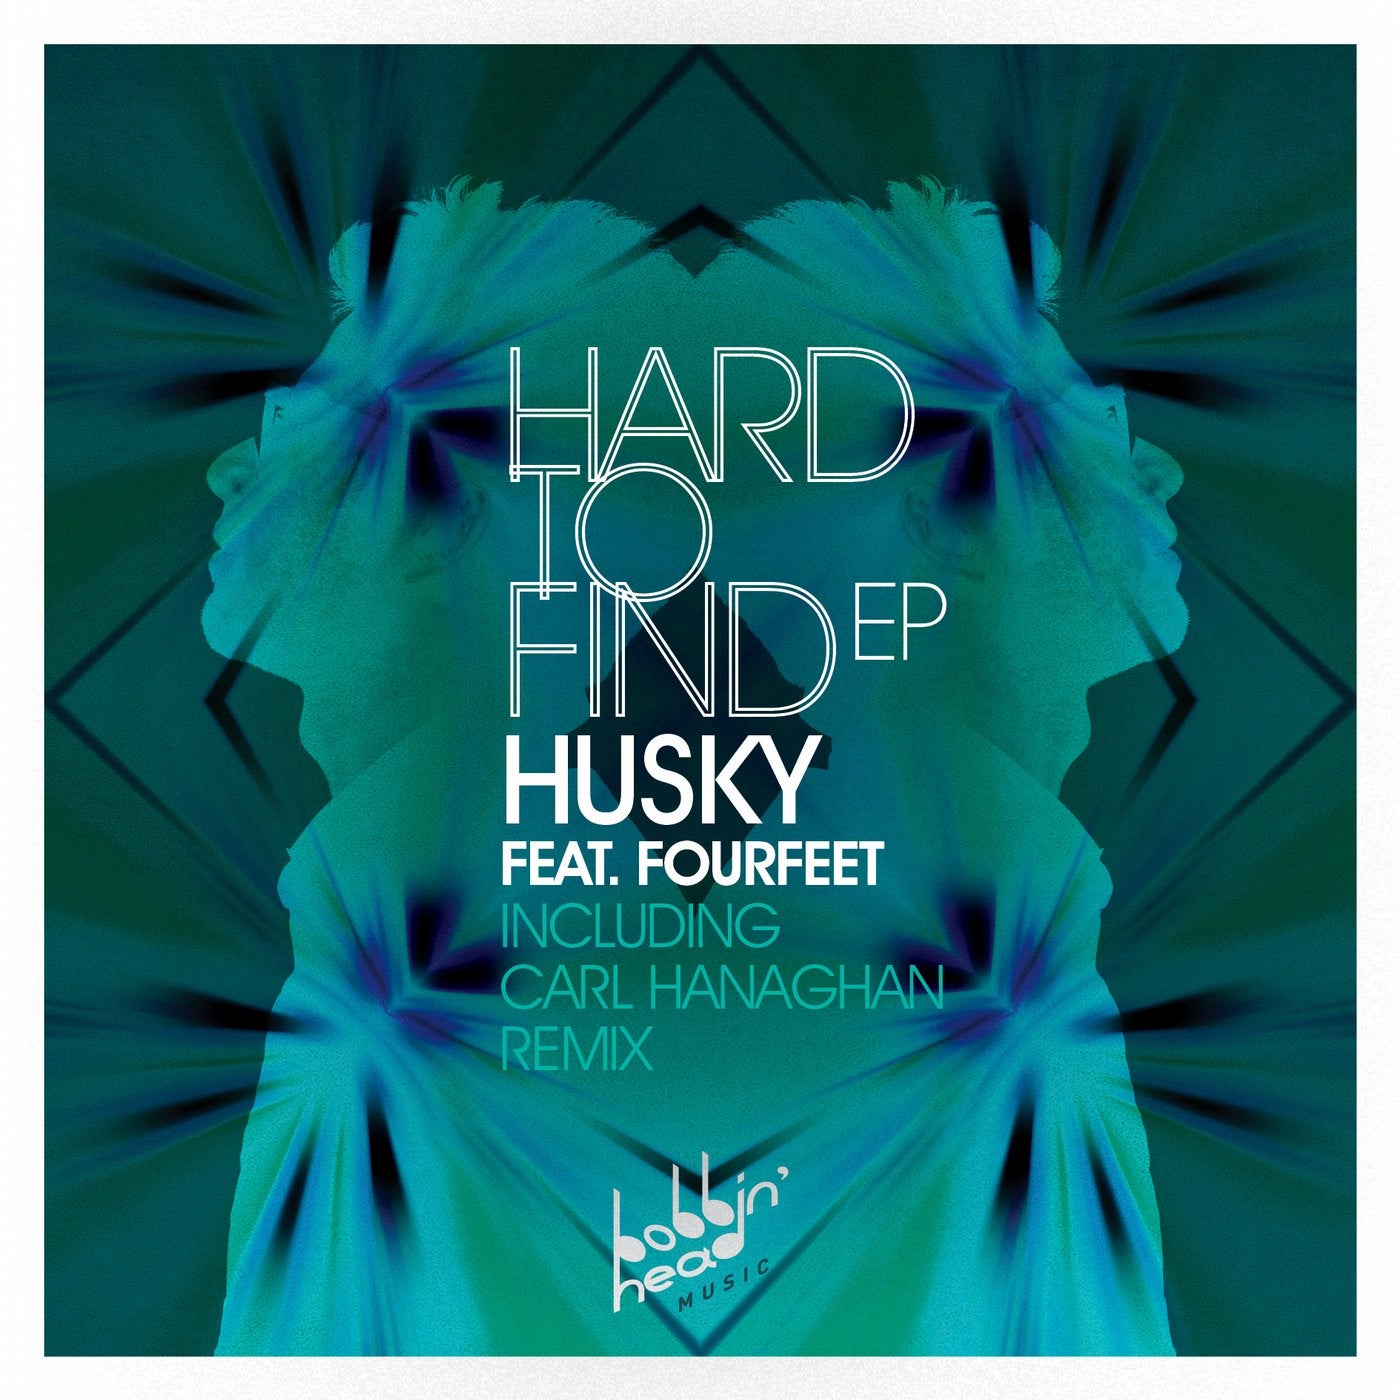 Hard to Find EP feat. Fourfeet